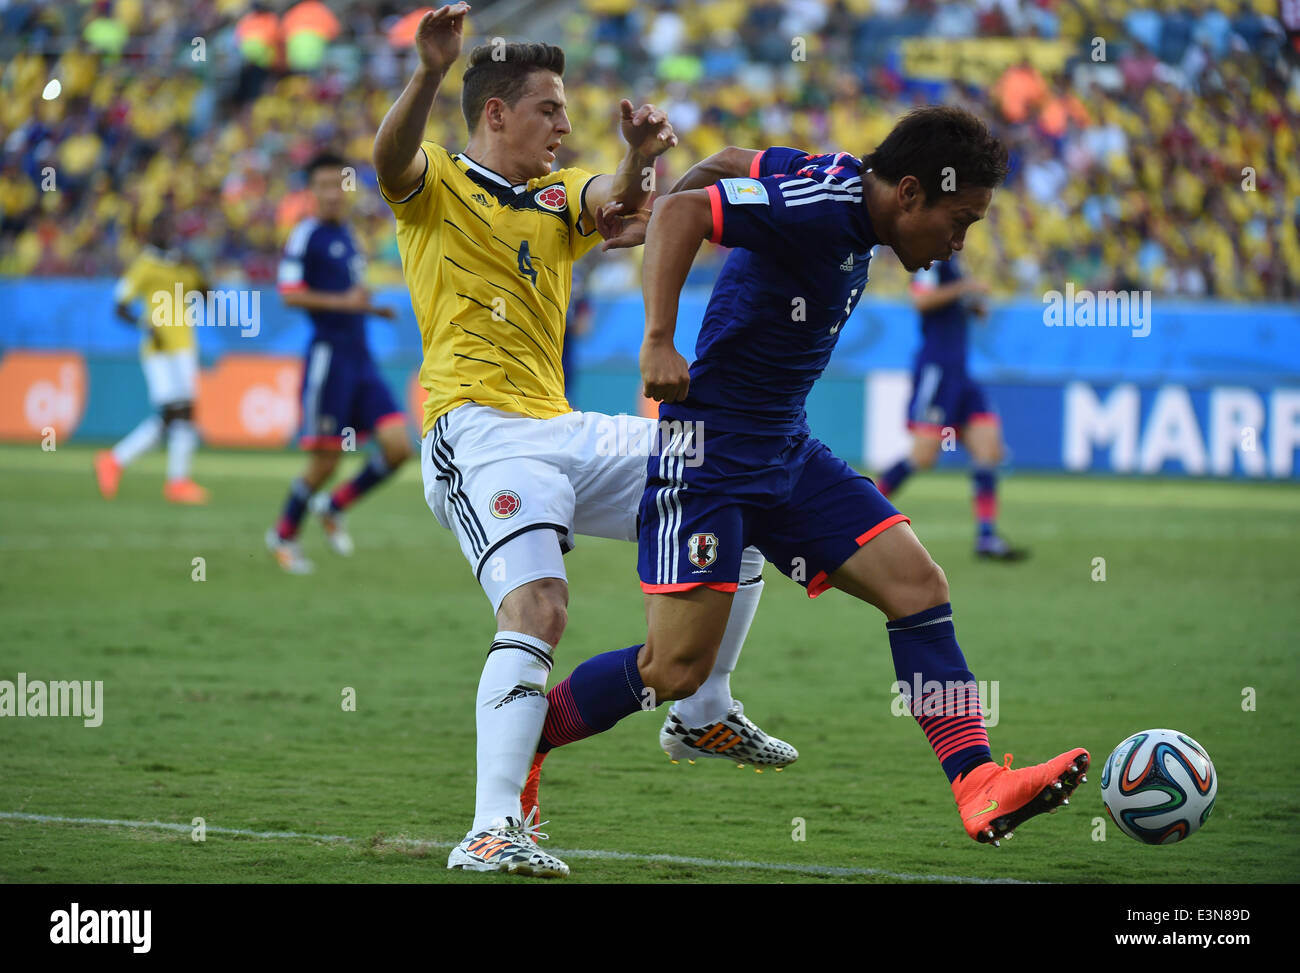 Cuiaba, Brazil. 24th June, 2014. Japan's Yuto Nagatomo (R) controls the ball during a Group C match between Japan and Colombia of 2014 FIFA World Cup at the Arena Pantanal Stadium in Cuiaba, Brazil, June 24, 2014. © Liu Dawei/Xinhua/Alamy Live News Stock Photo